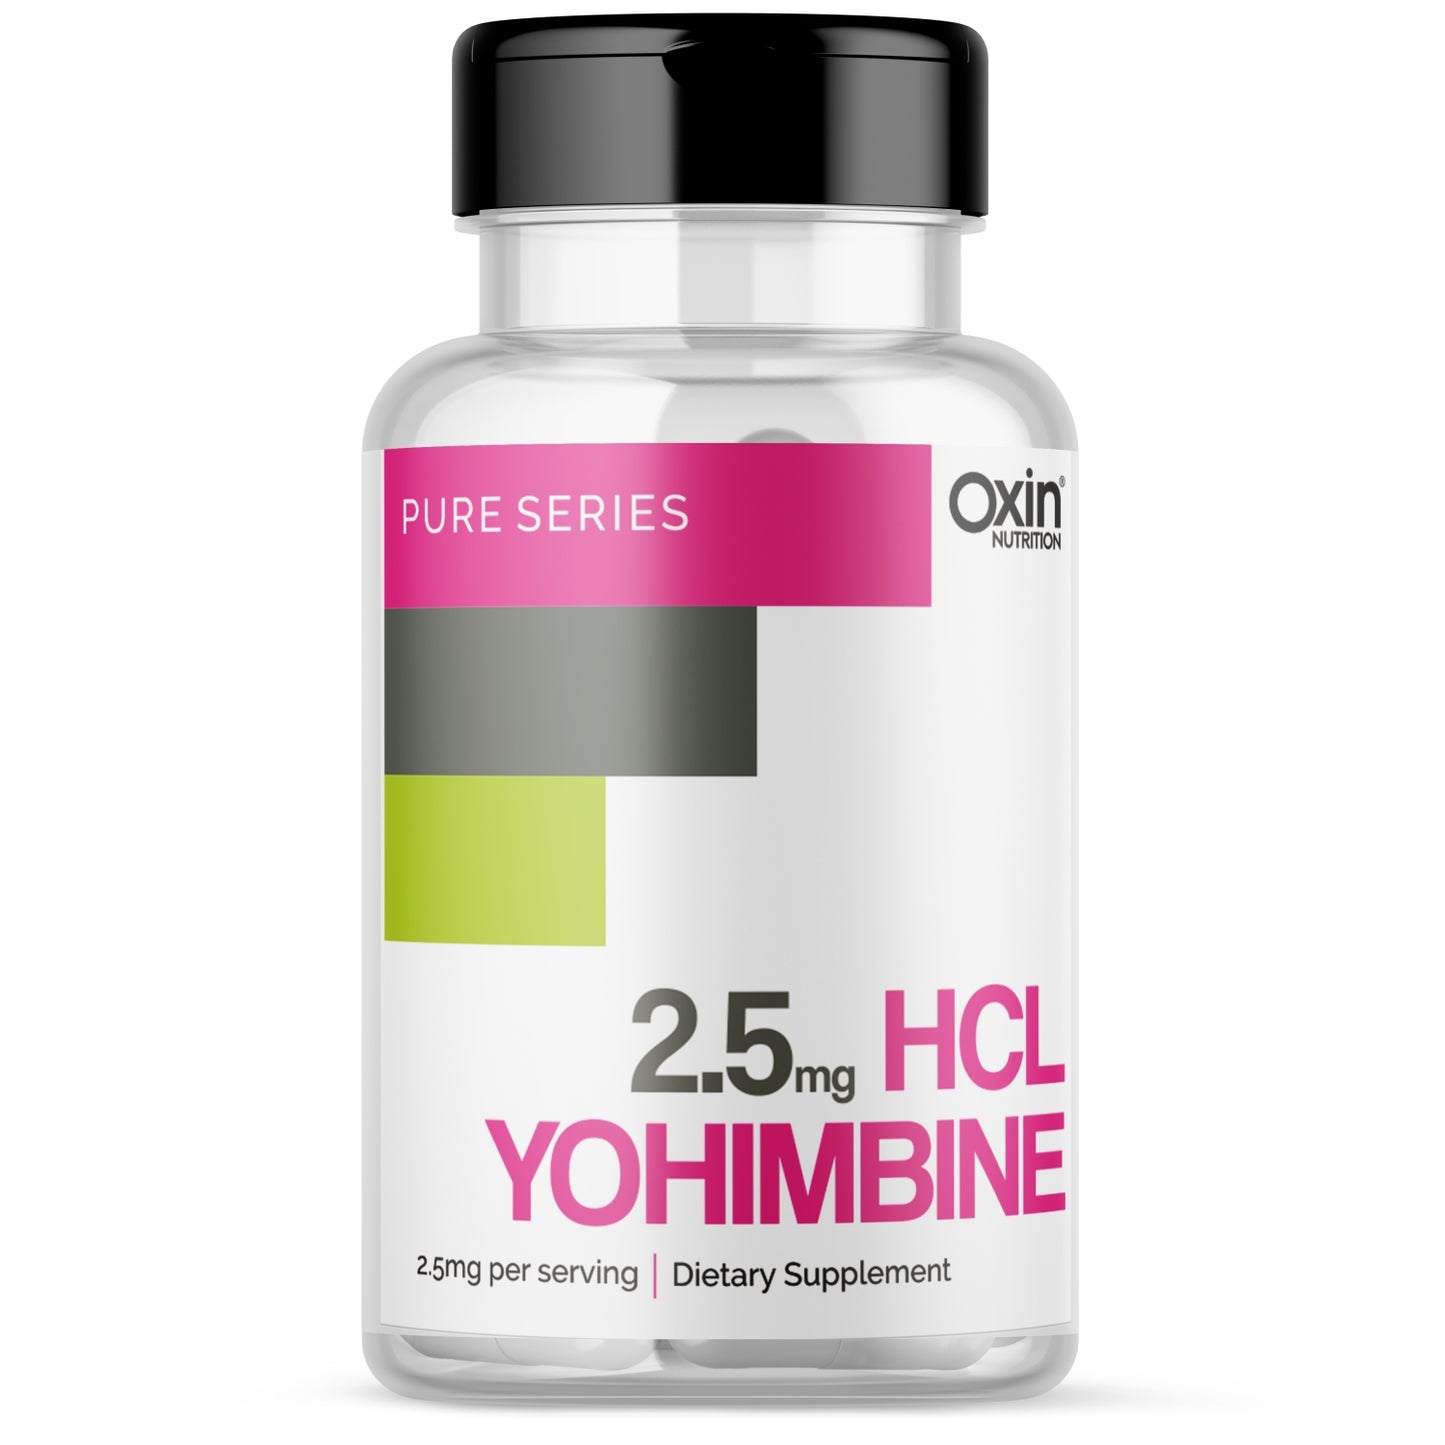 Oxin® Nutrition Yohimbine HCL 2.5mg Capsules